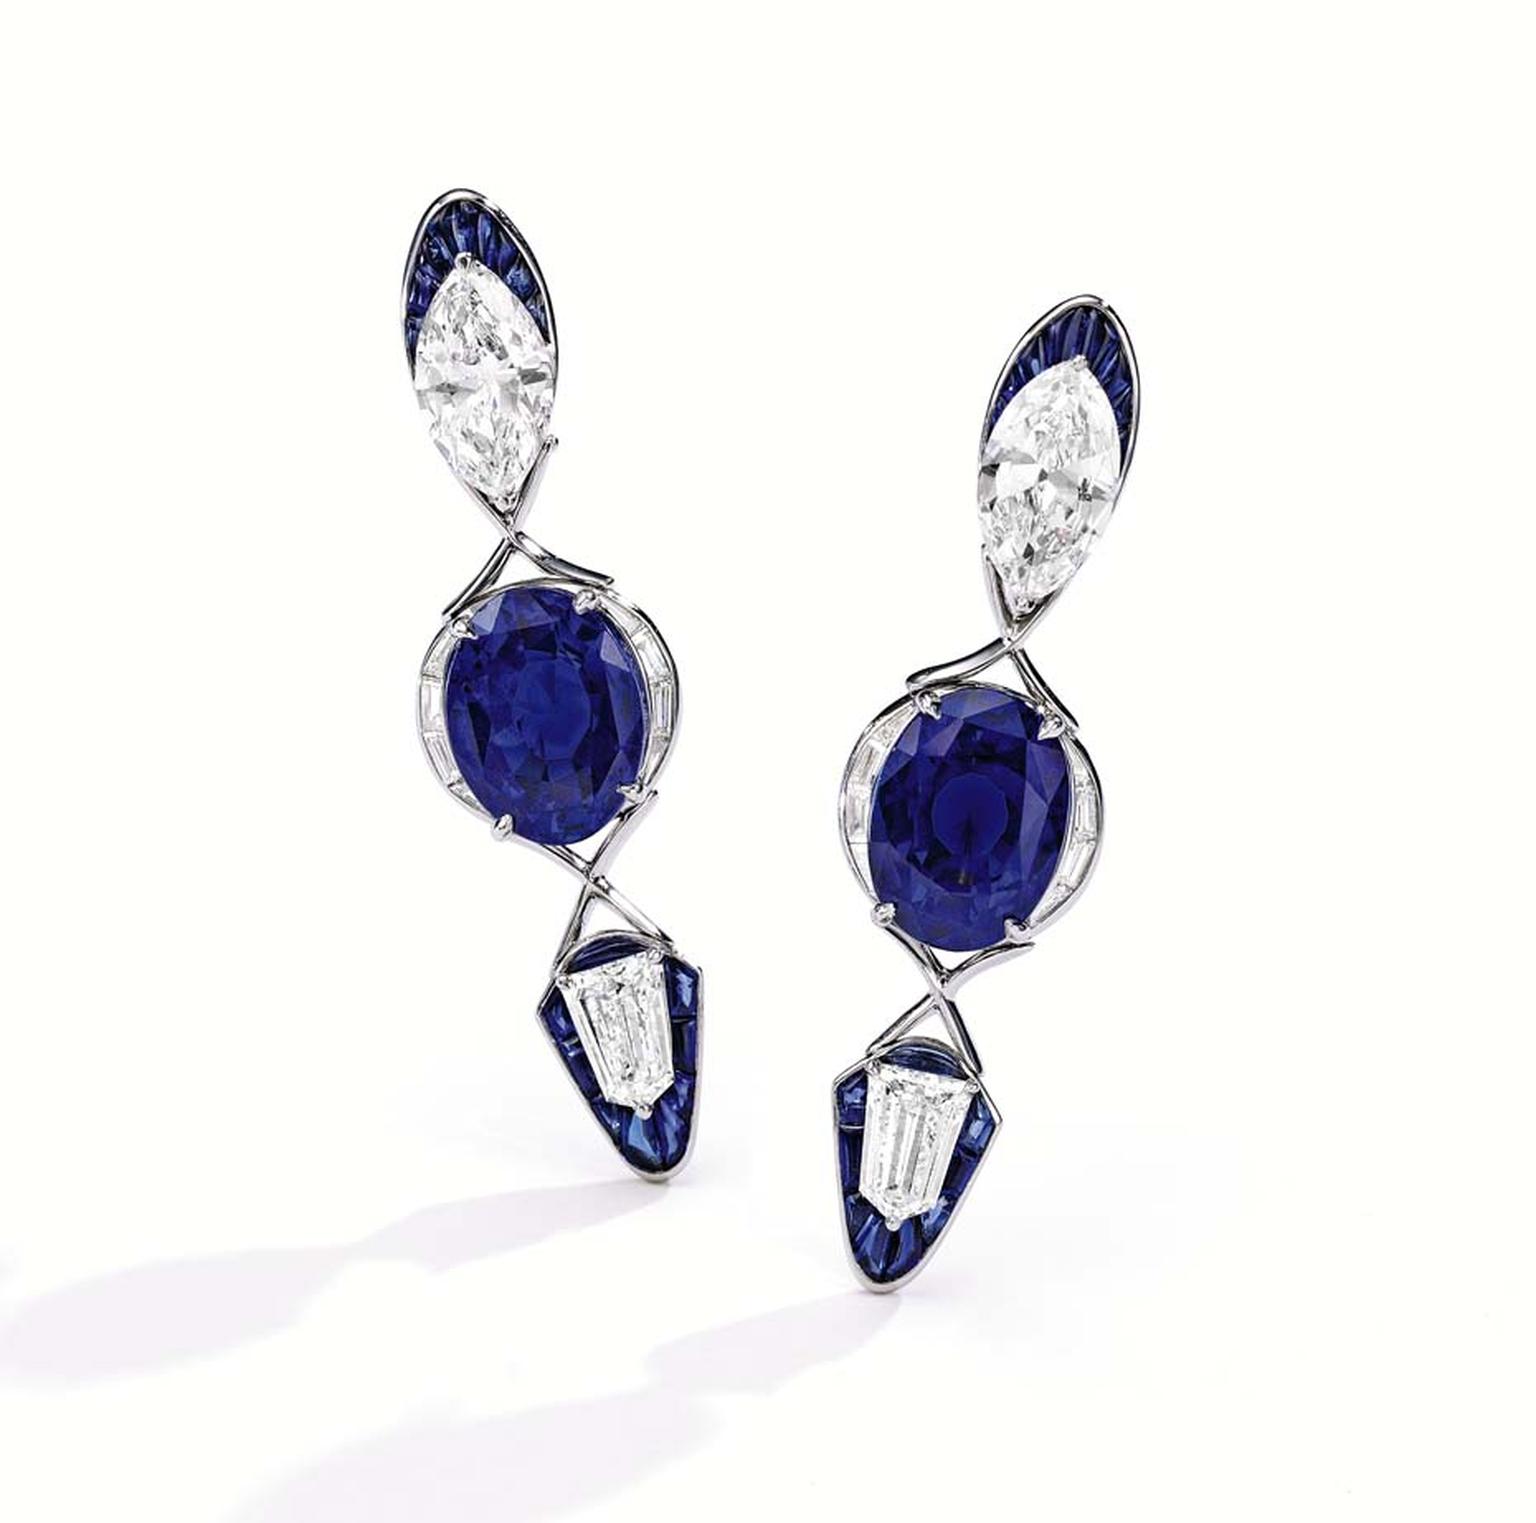 Alexandre Reza earrings, featuring two unheated oval-shaped Ceylon sapphires, further accented by baguette diamonds and French buffed sapphires.